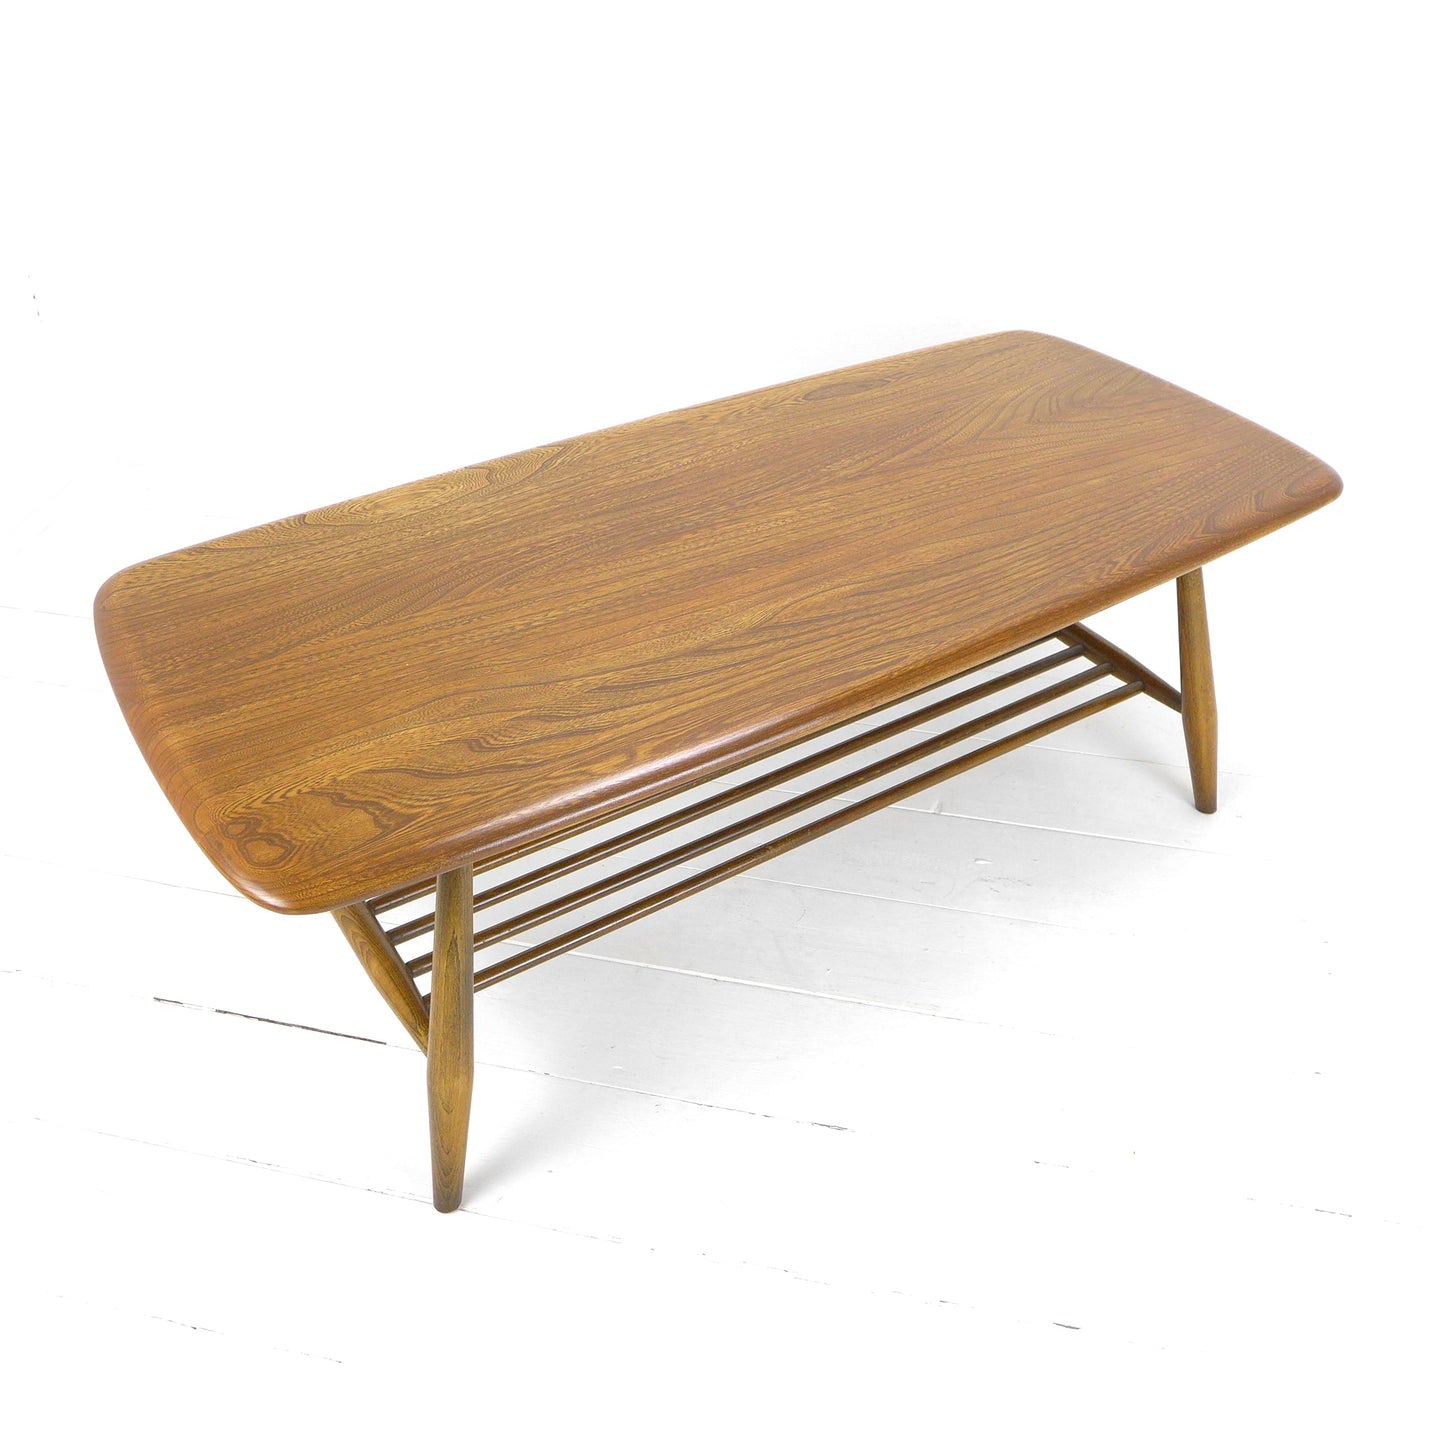 Ercol Coffee Table with Magazine Rack n.o. 398/459 - Vintage Mid Century Classic